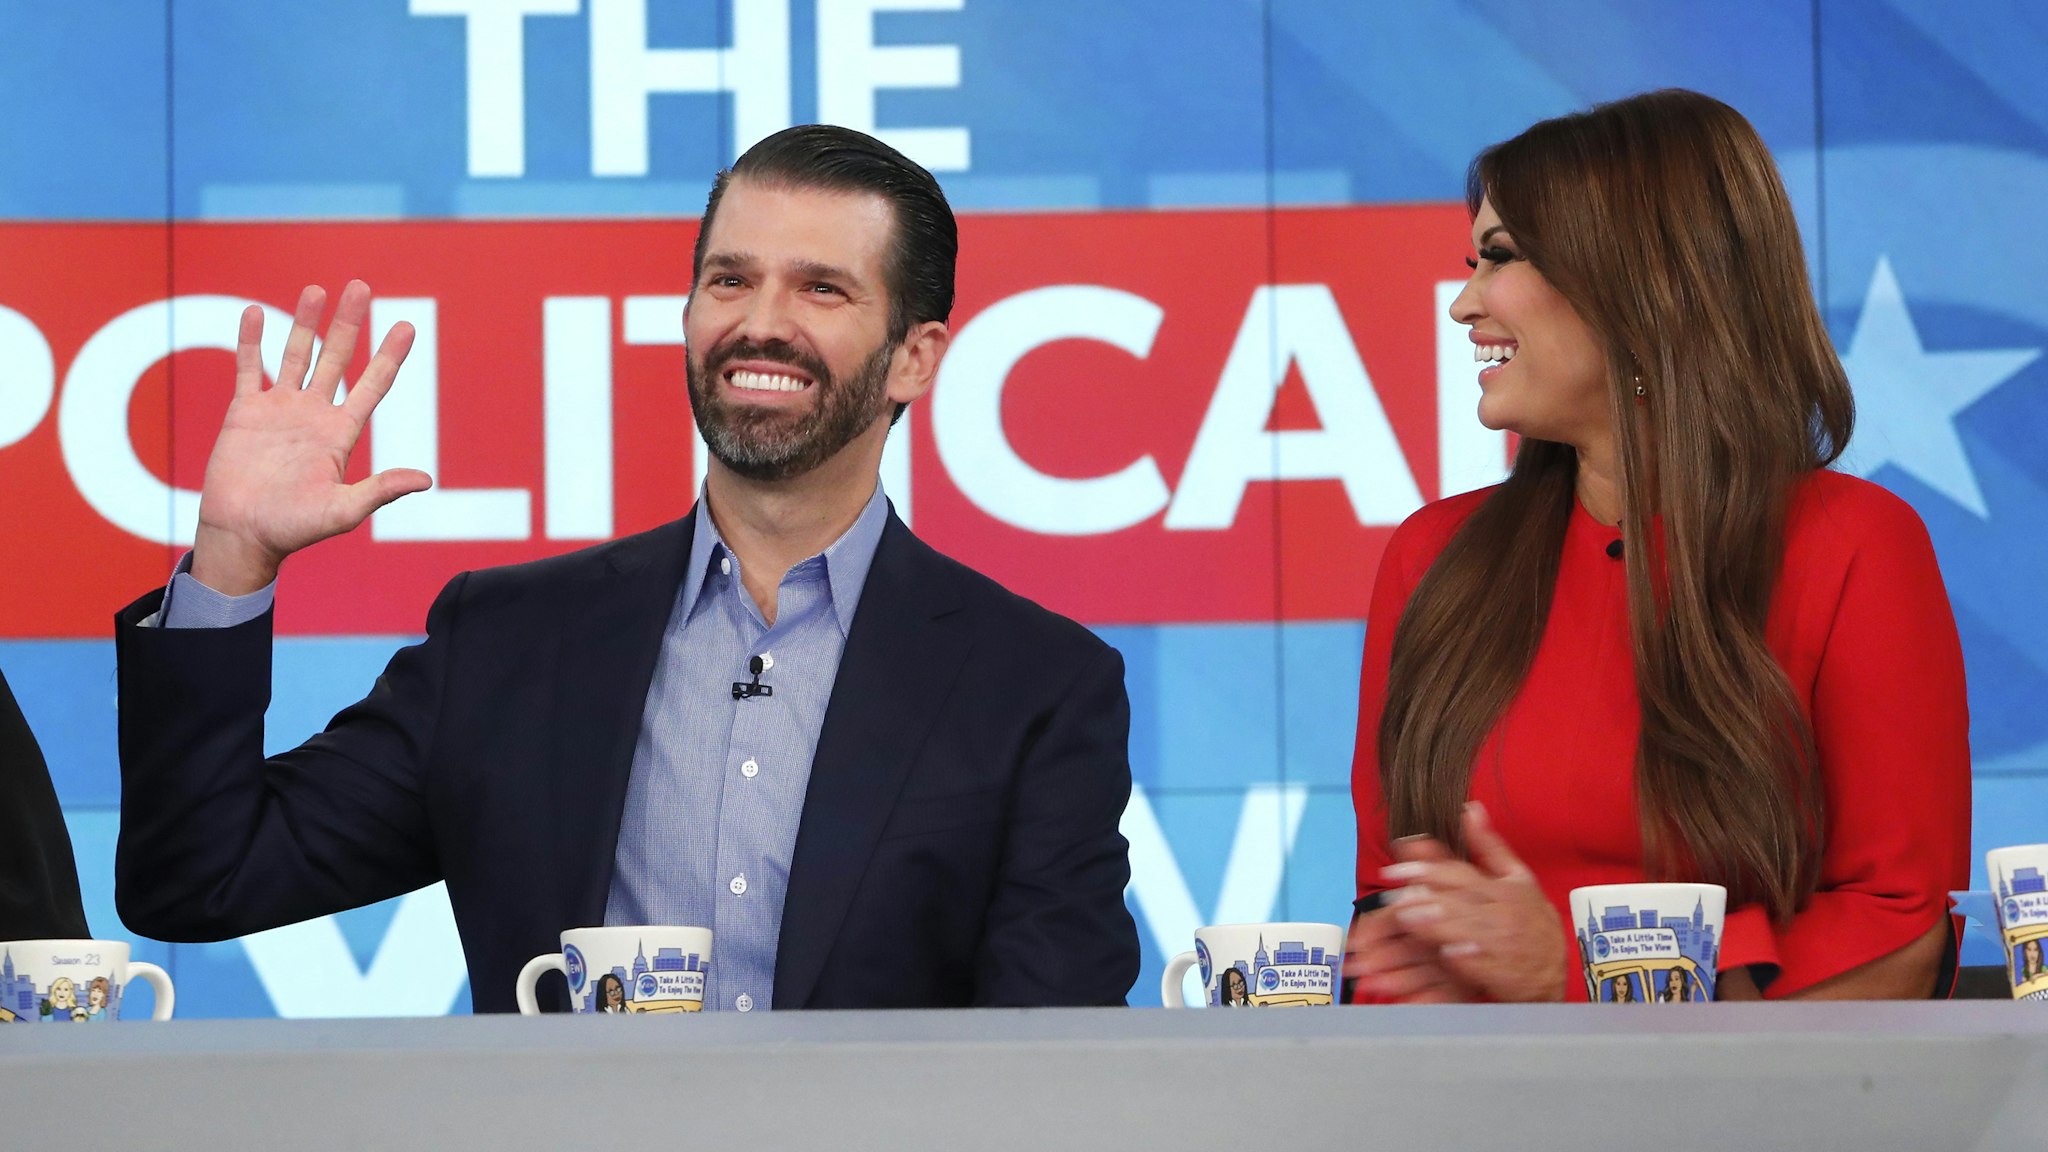 Donald Trump Jr. and Kimberly Guilfoyle appeared today, Thursday, November 7, 2019 on ABC's "The View," as the show celebrated its 5,000th episode. "The View" airs Monday-Friday 11am-12 noon, ET on ABC.